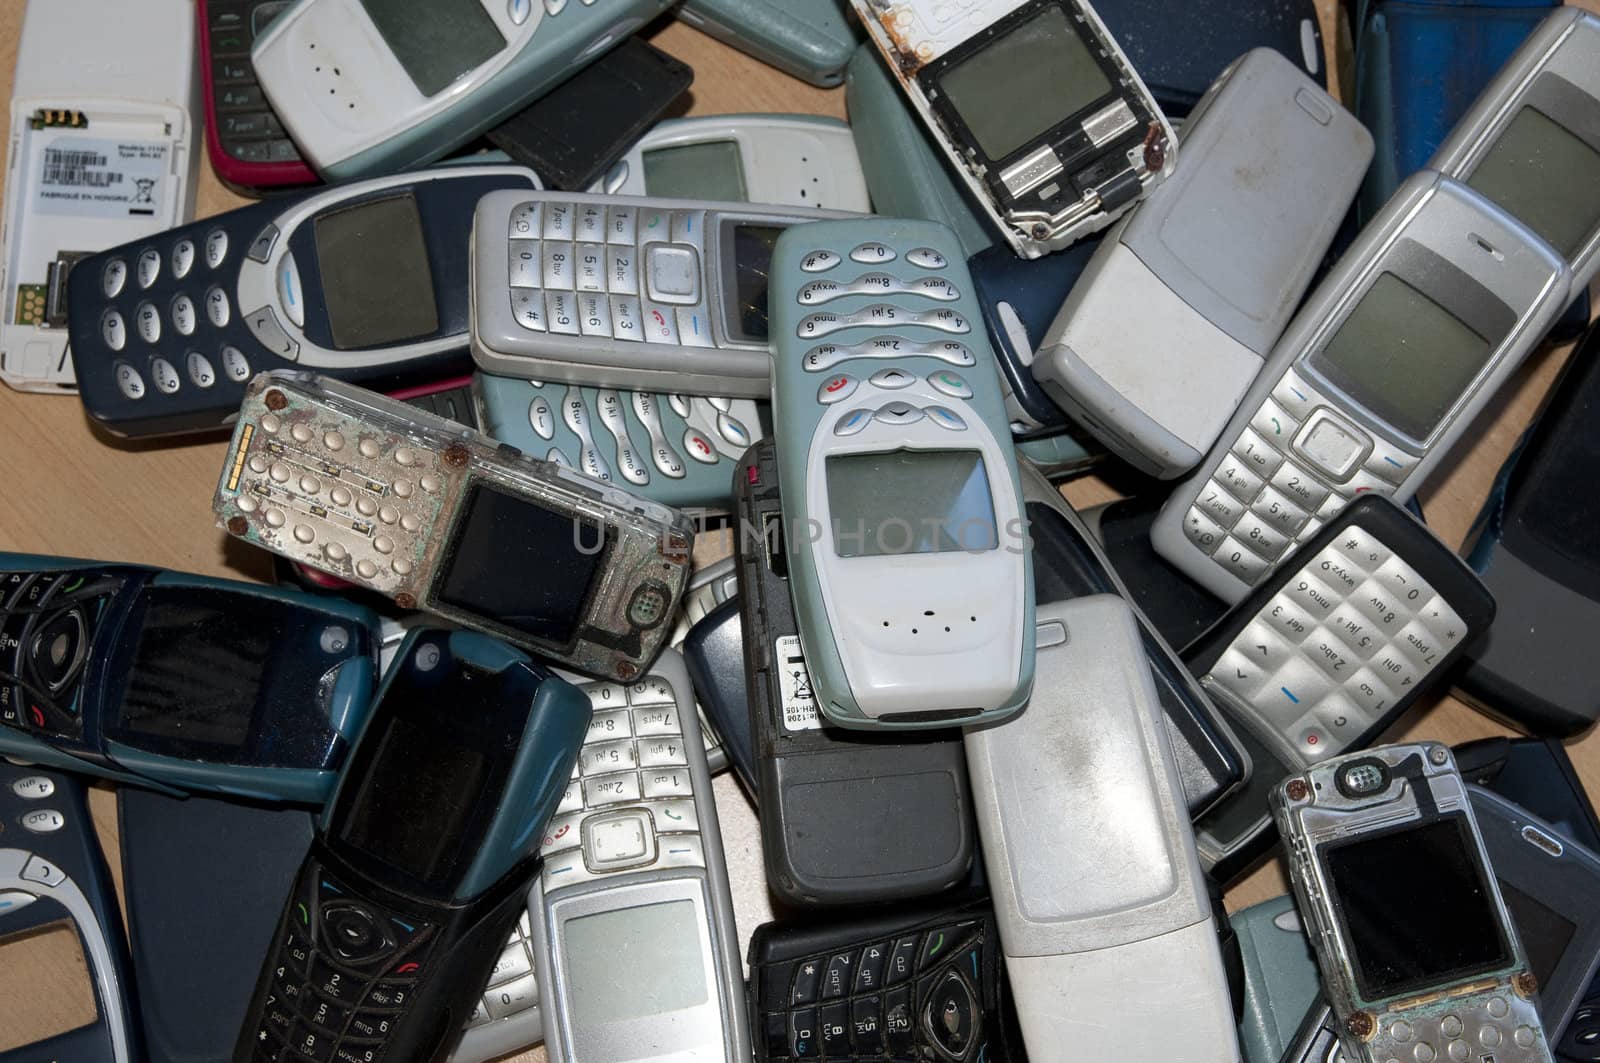 Lots of old and very used mobile phones